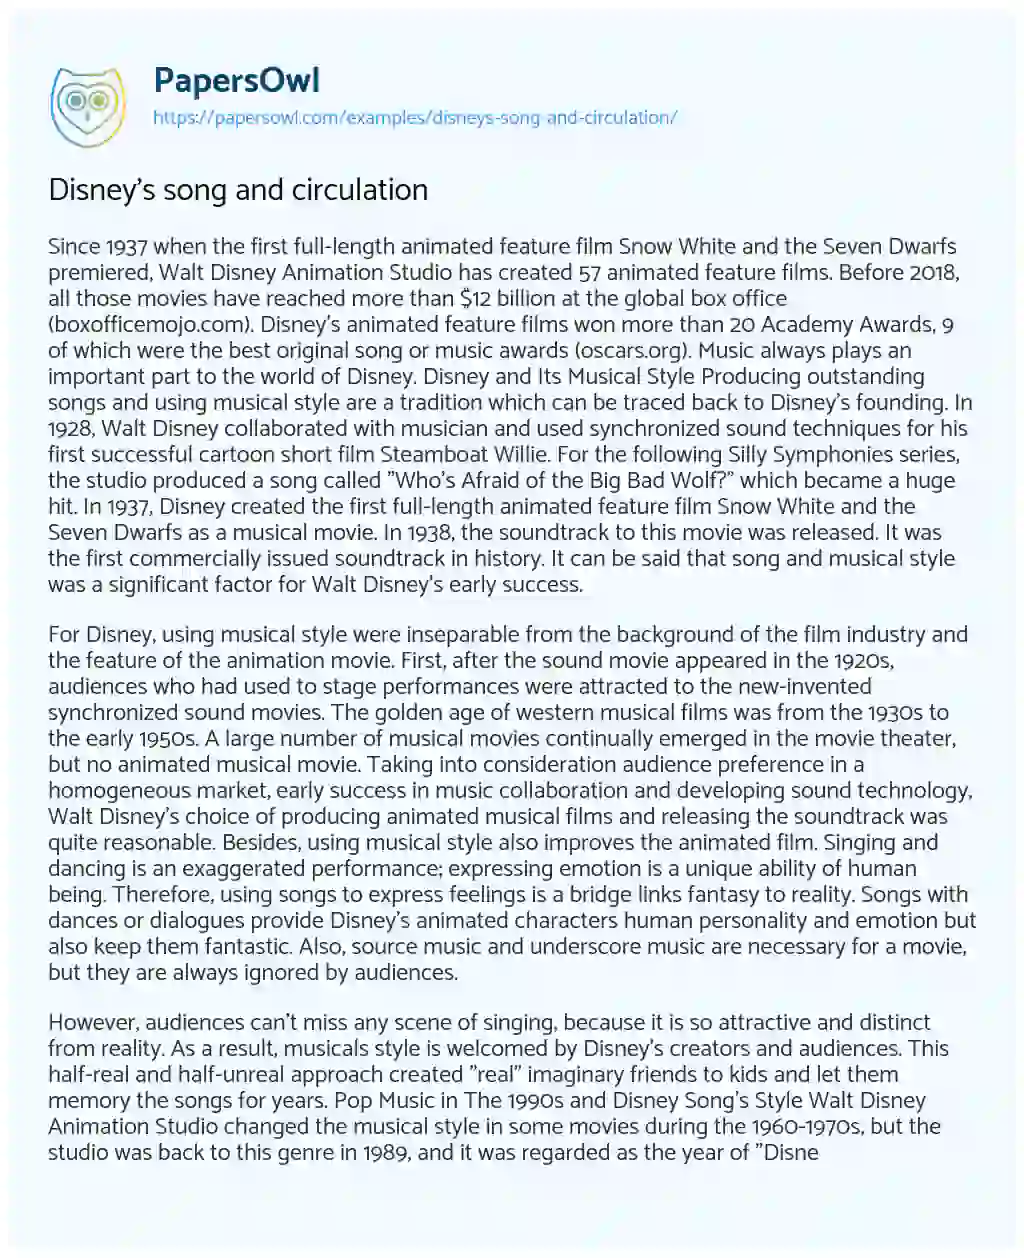 Essay on Disney’s Song and Circulation